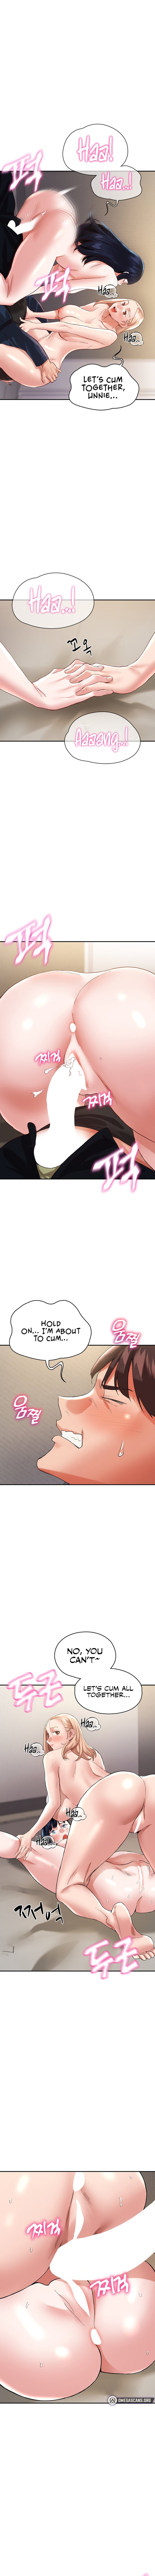 living-with-two-busty-women-chap-33-10